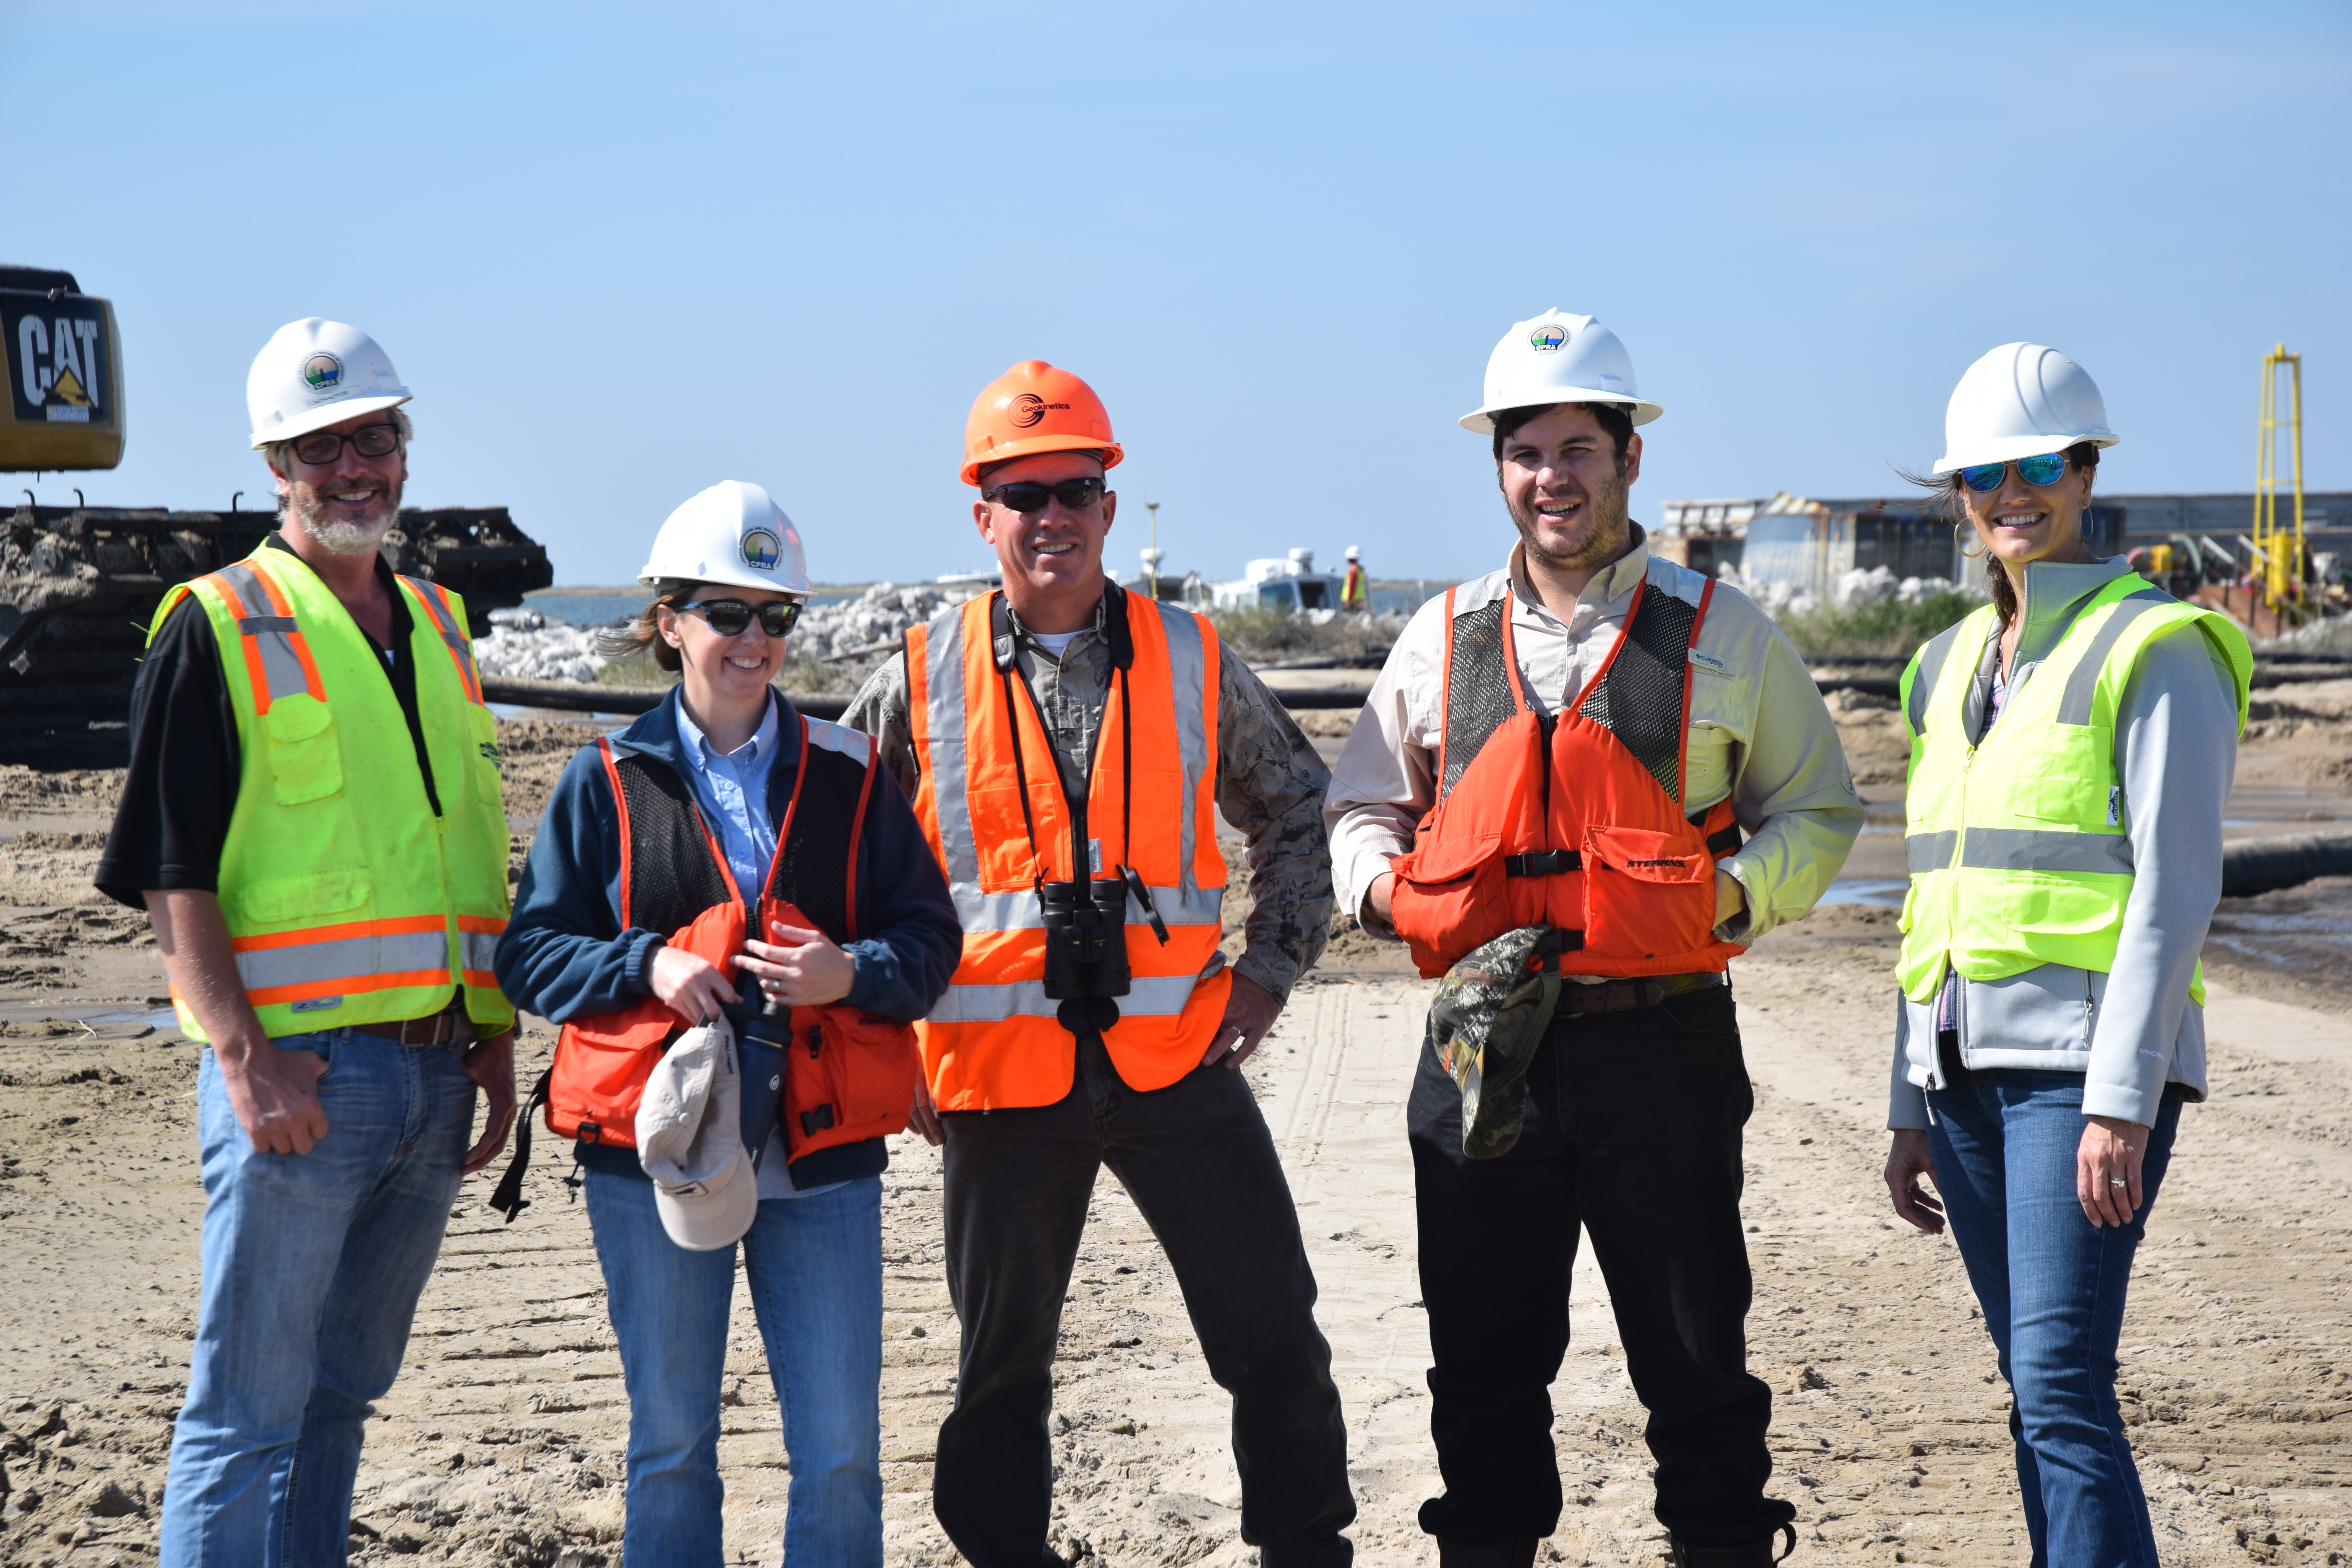 Some of the Queen Bess Island project team members from left to right: Garvin Pittman, Katie Freer, Todd Baker, Jacques Boudreaux and Amanda Phillips.